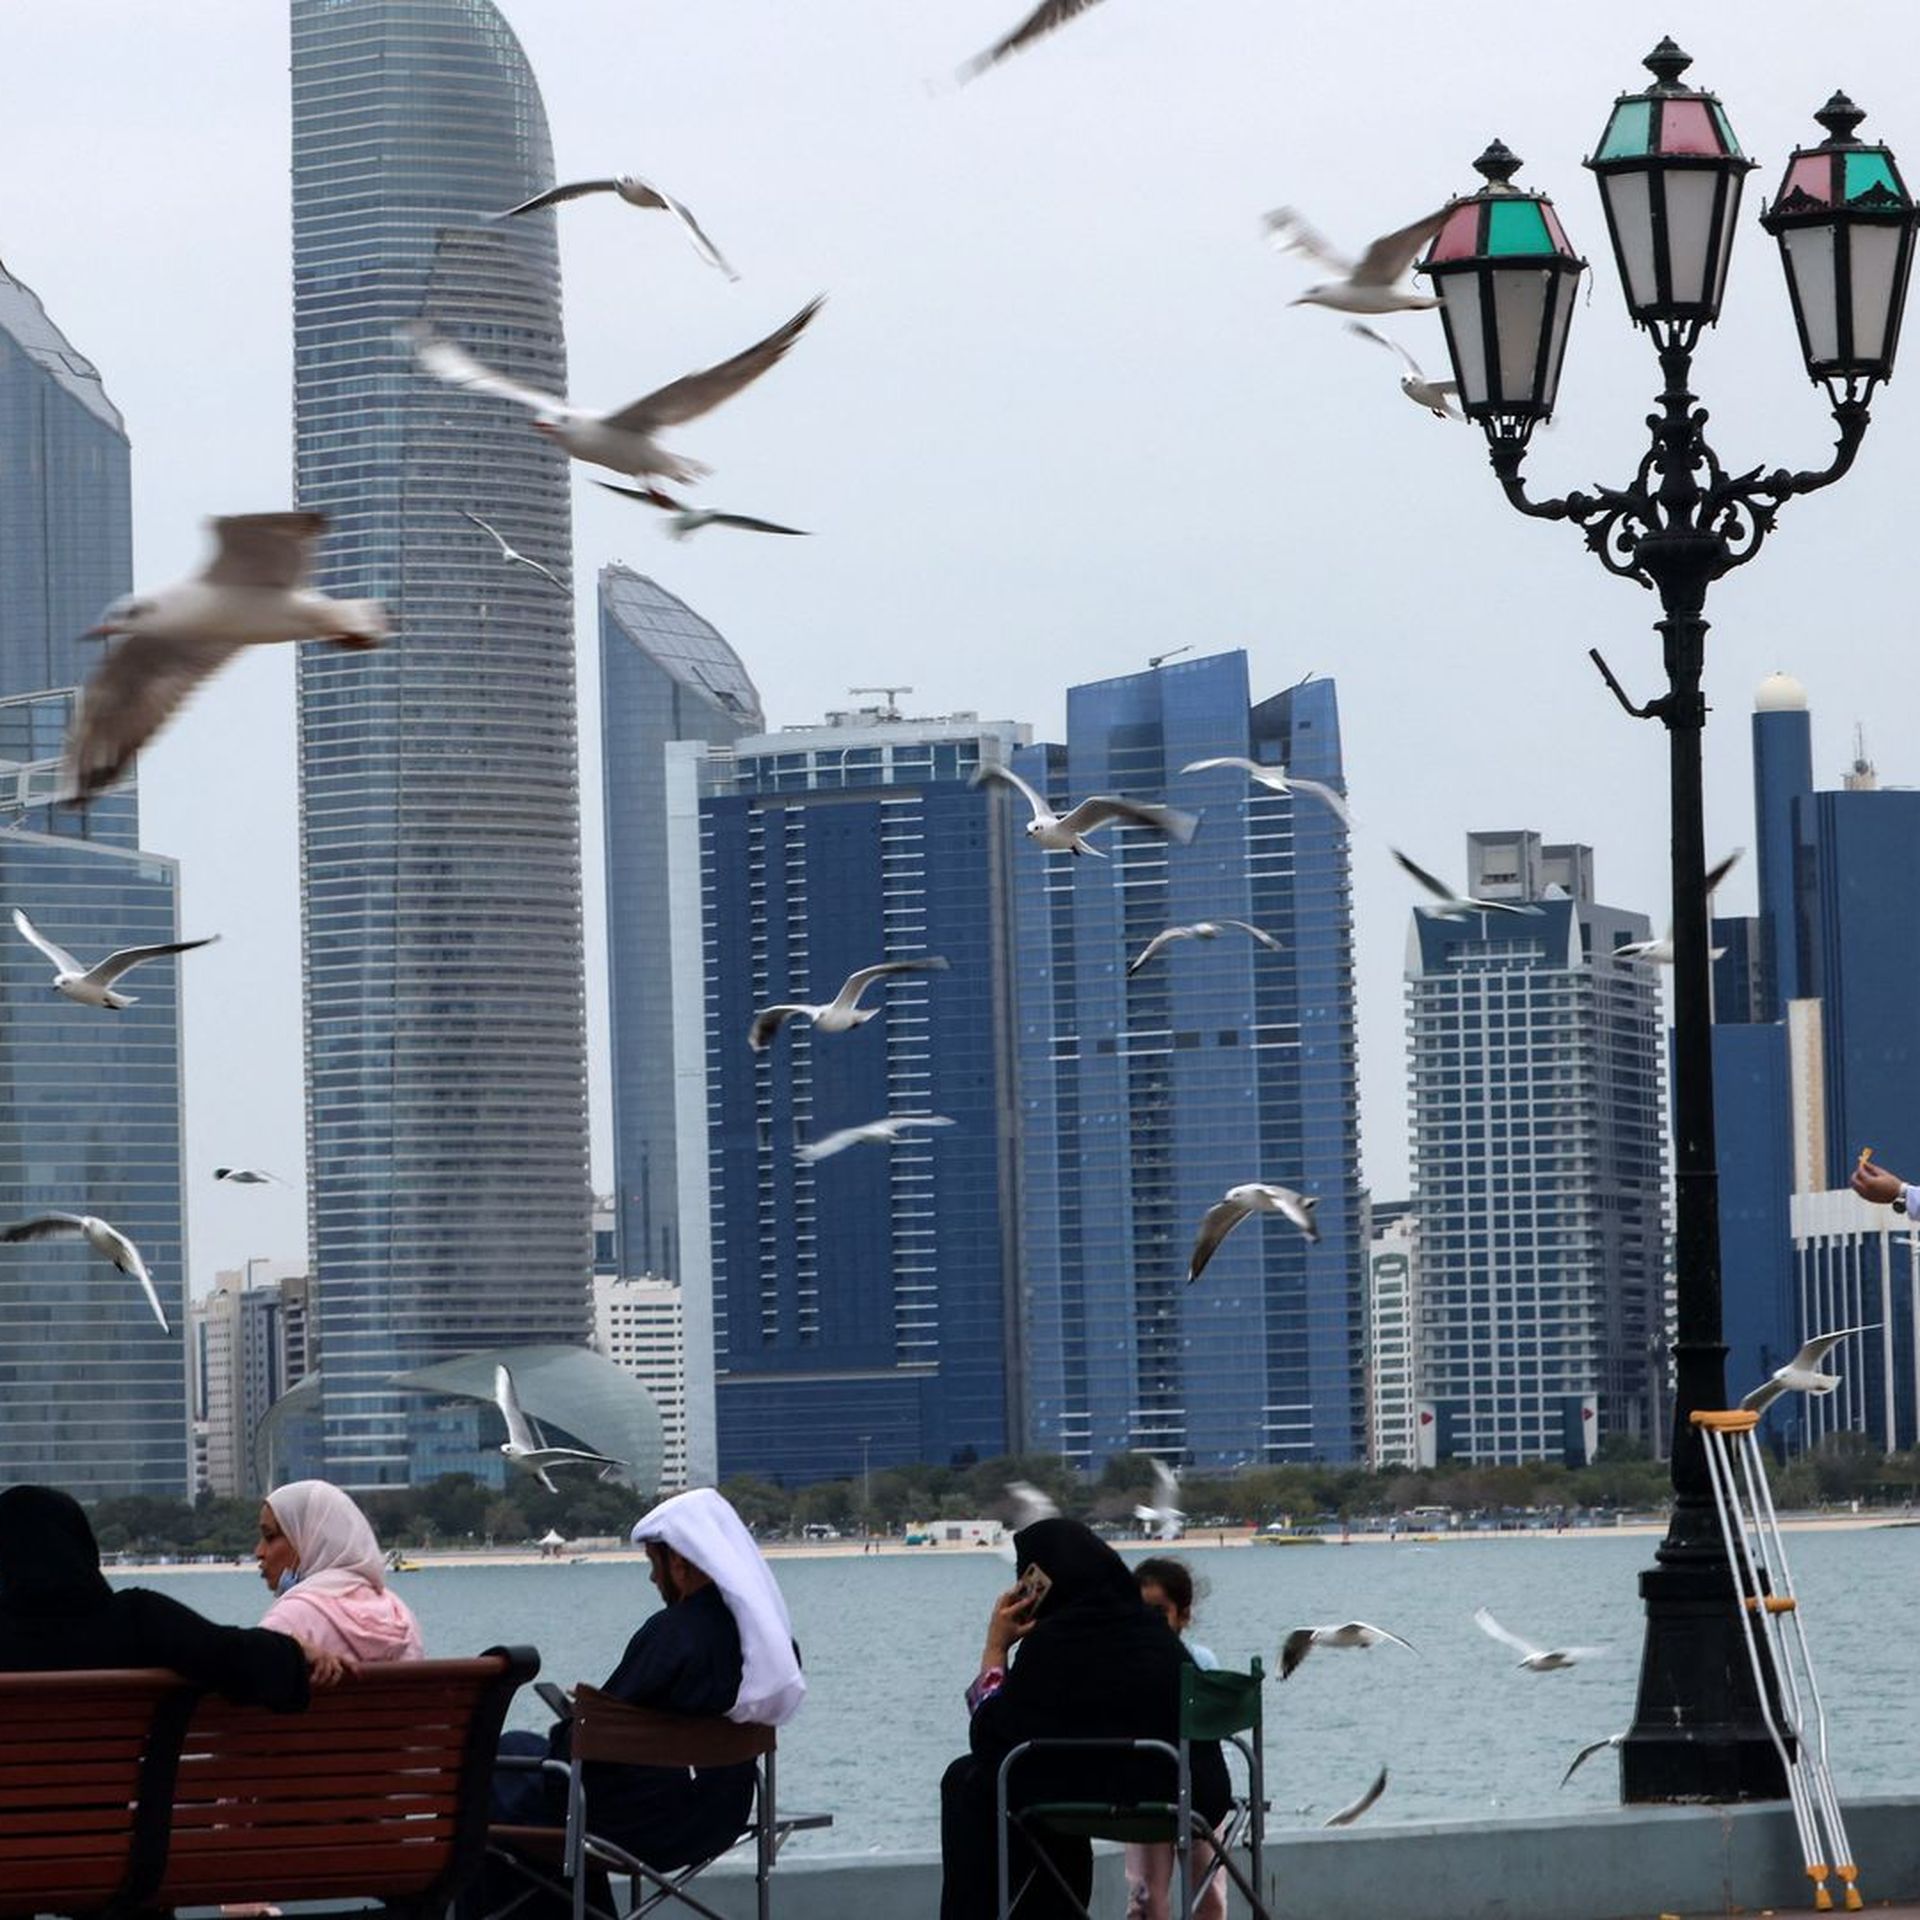 A view of Abu Dhabi this week. Photo: Giuseppe Cacace/AFP via Getty